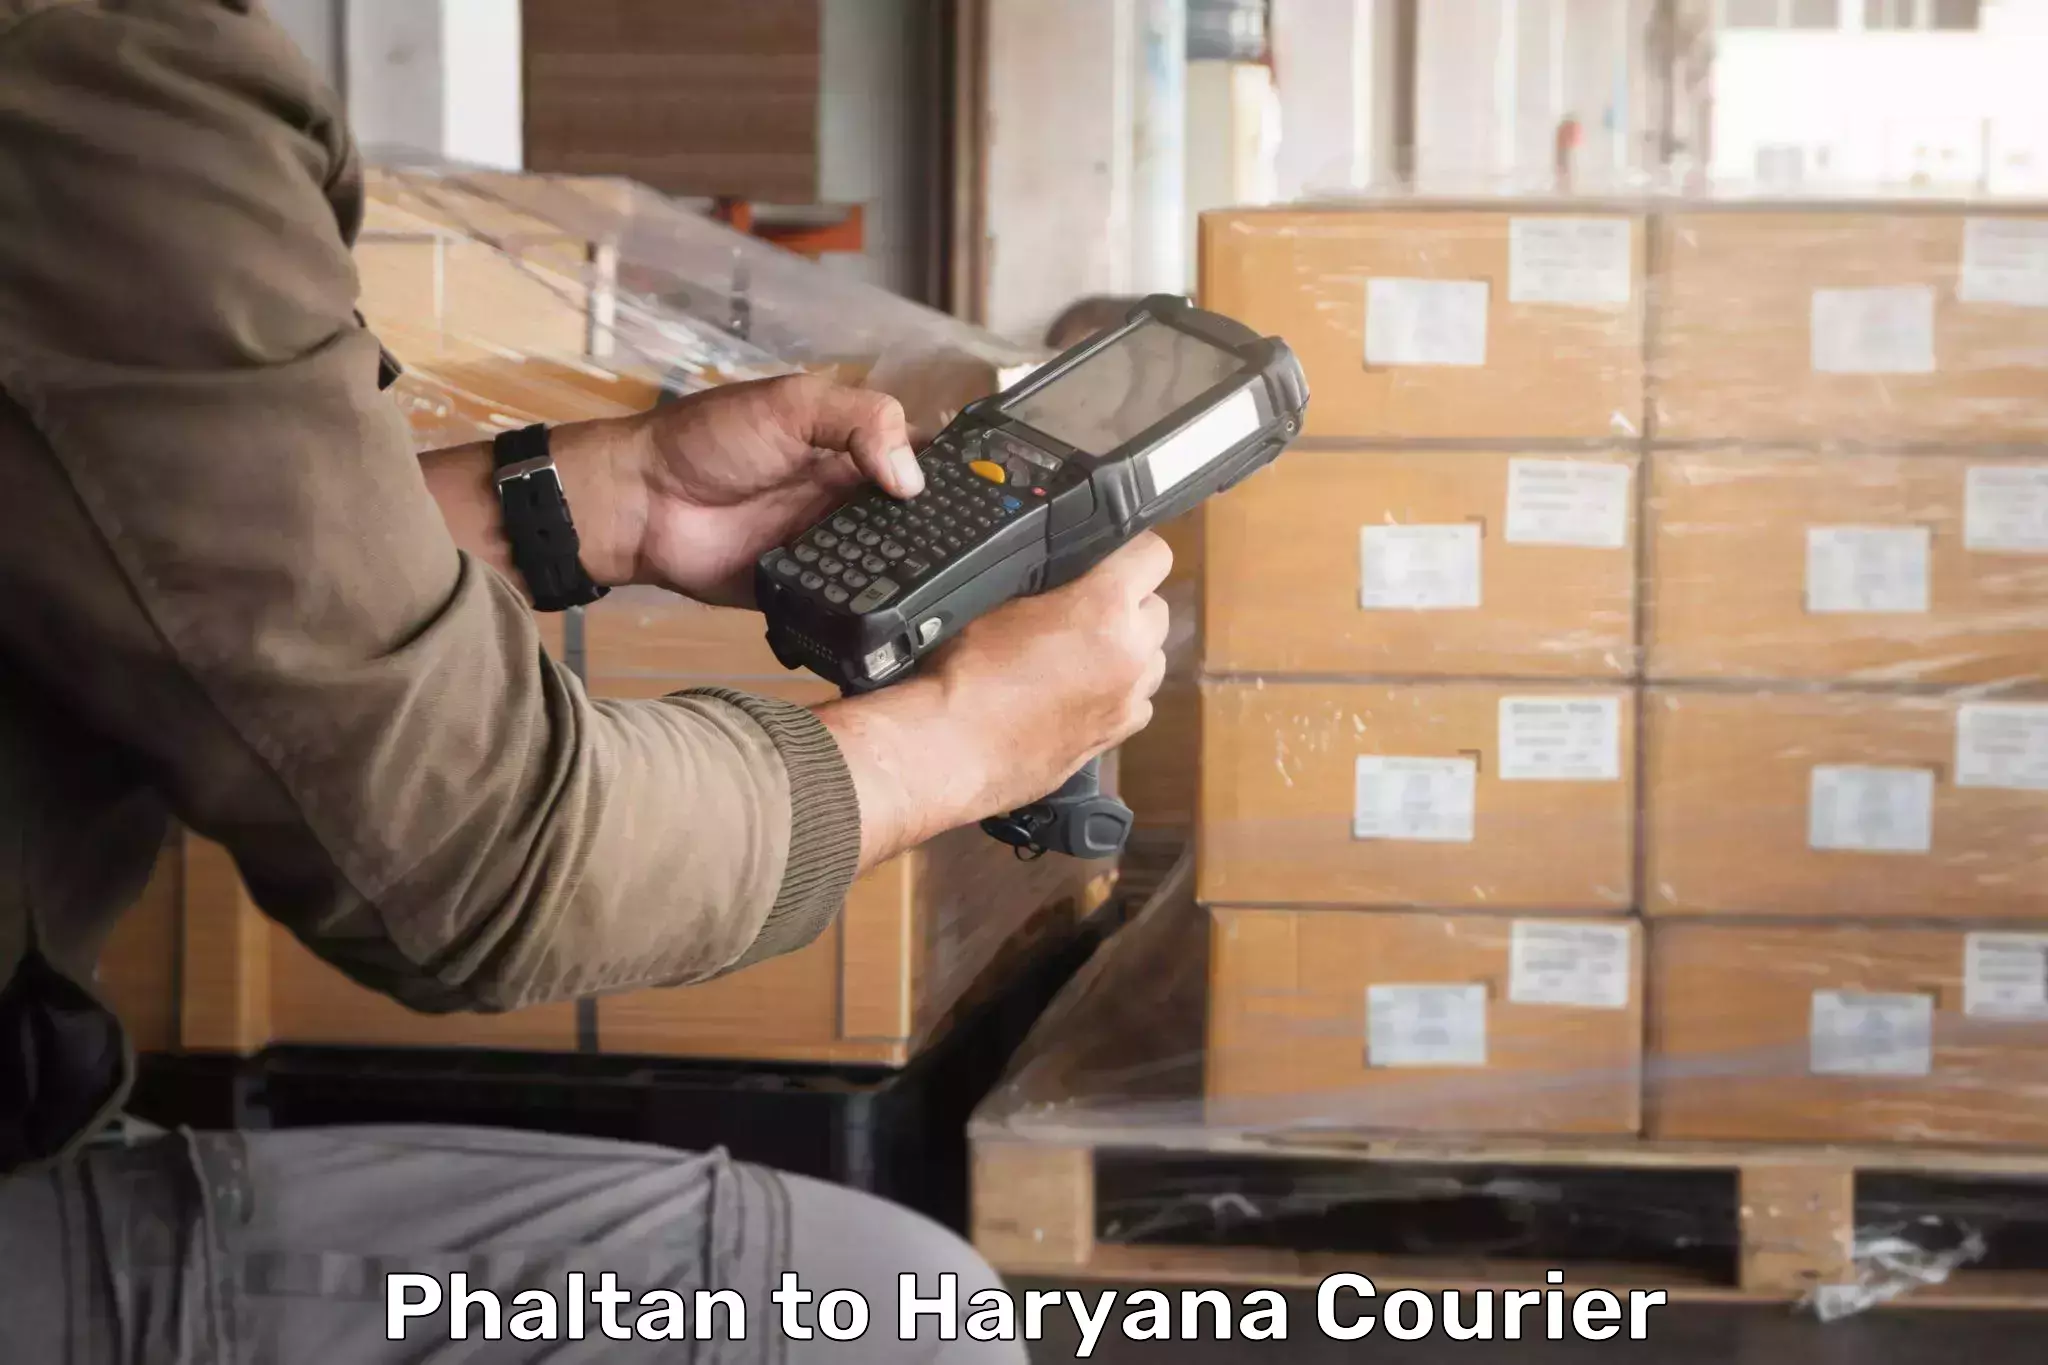 Personalized courier experiences Phaltan to Charkhi Dadri